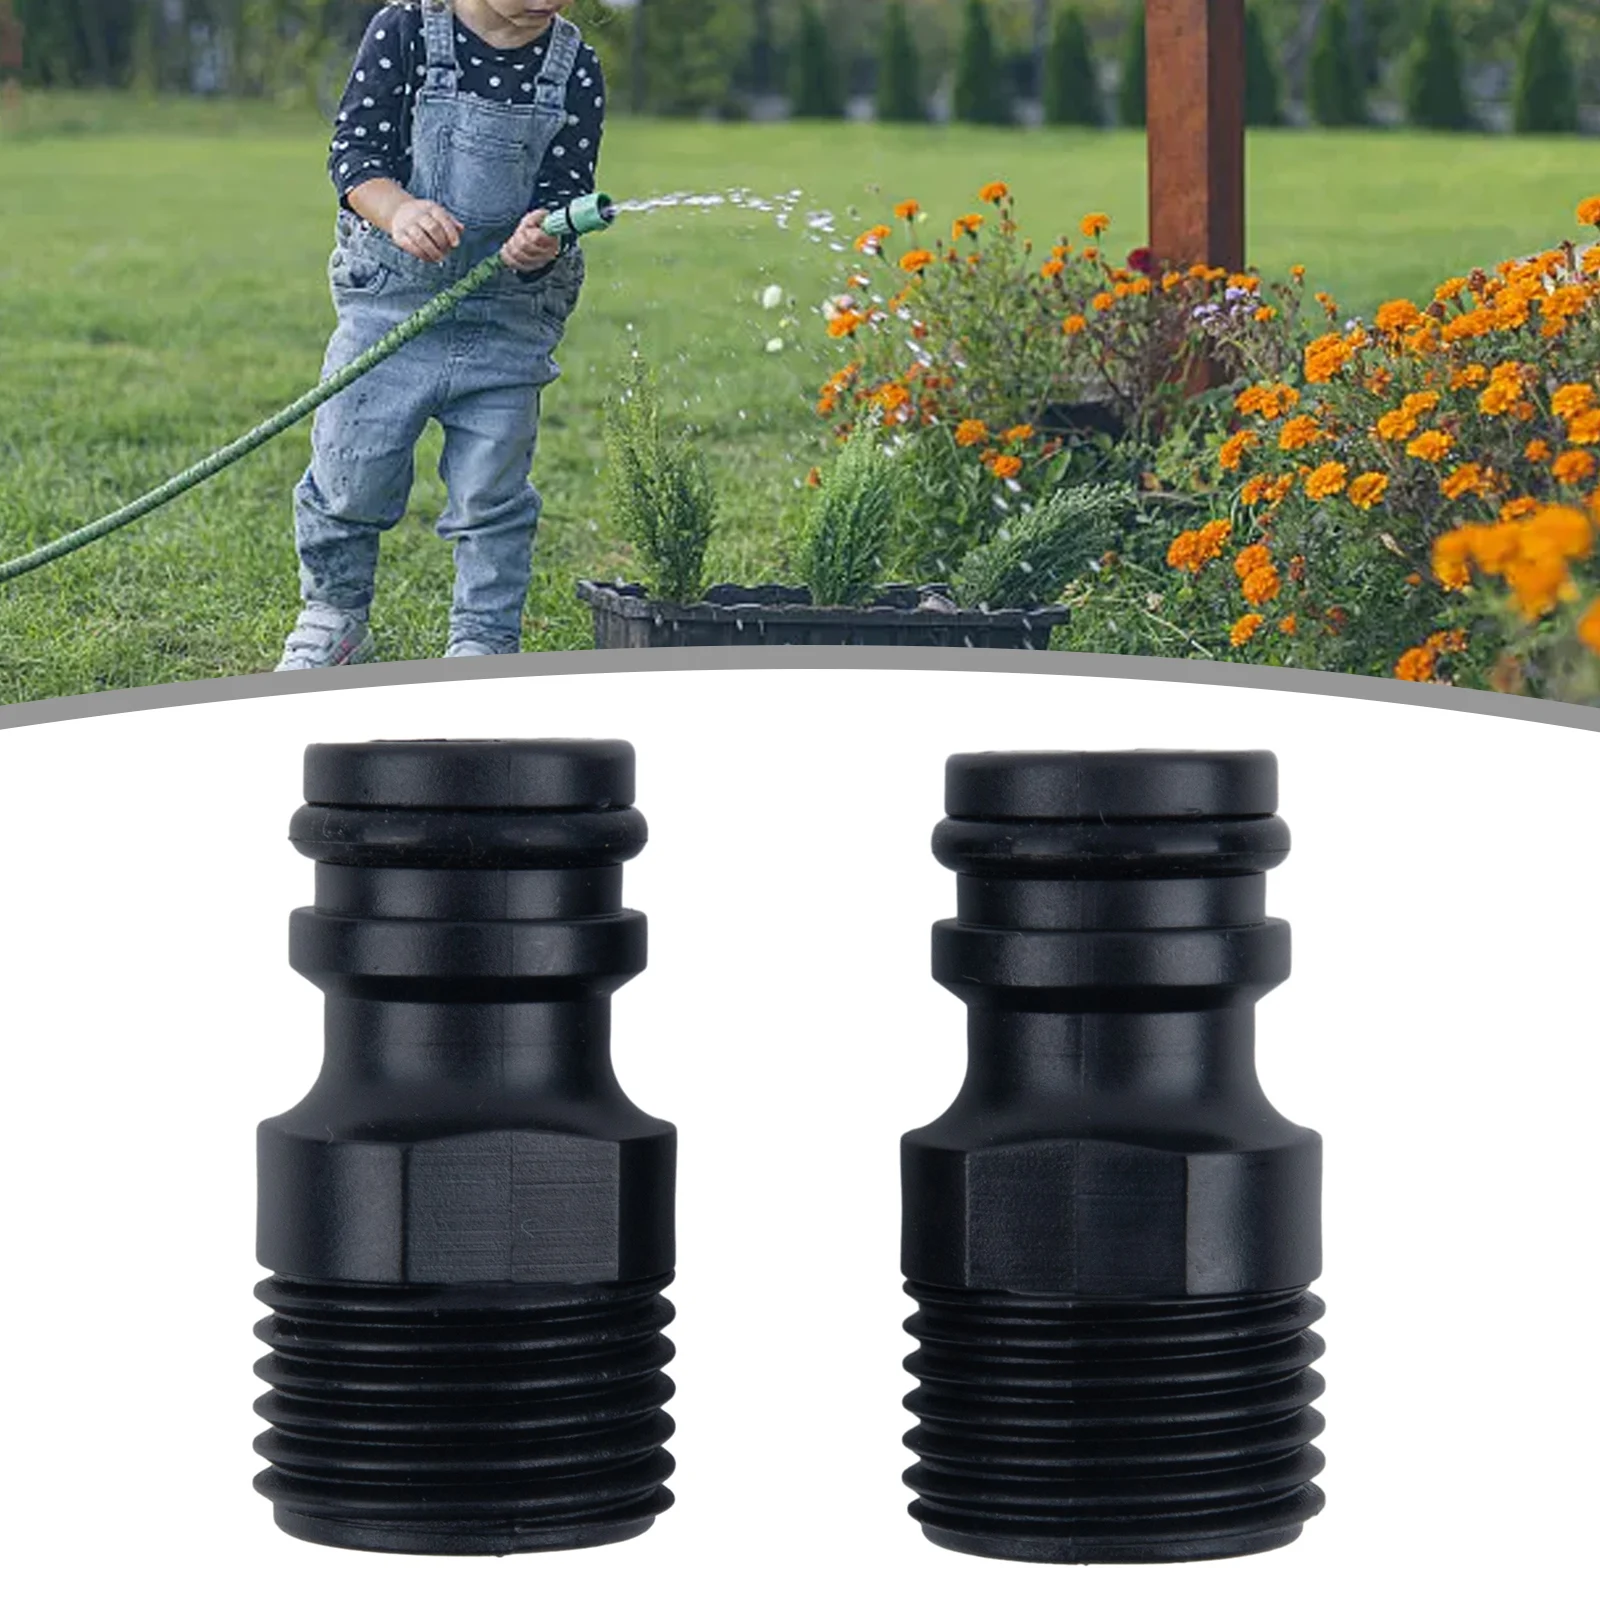 

2 X Threaded Tap Adaptor 1/2 Inch BSP Garden Water Hose Quick Pipe Connector Fitting Garden Irrigation System Parts Adapters